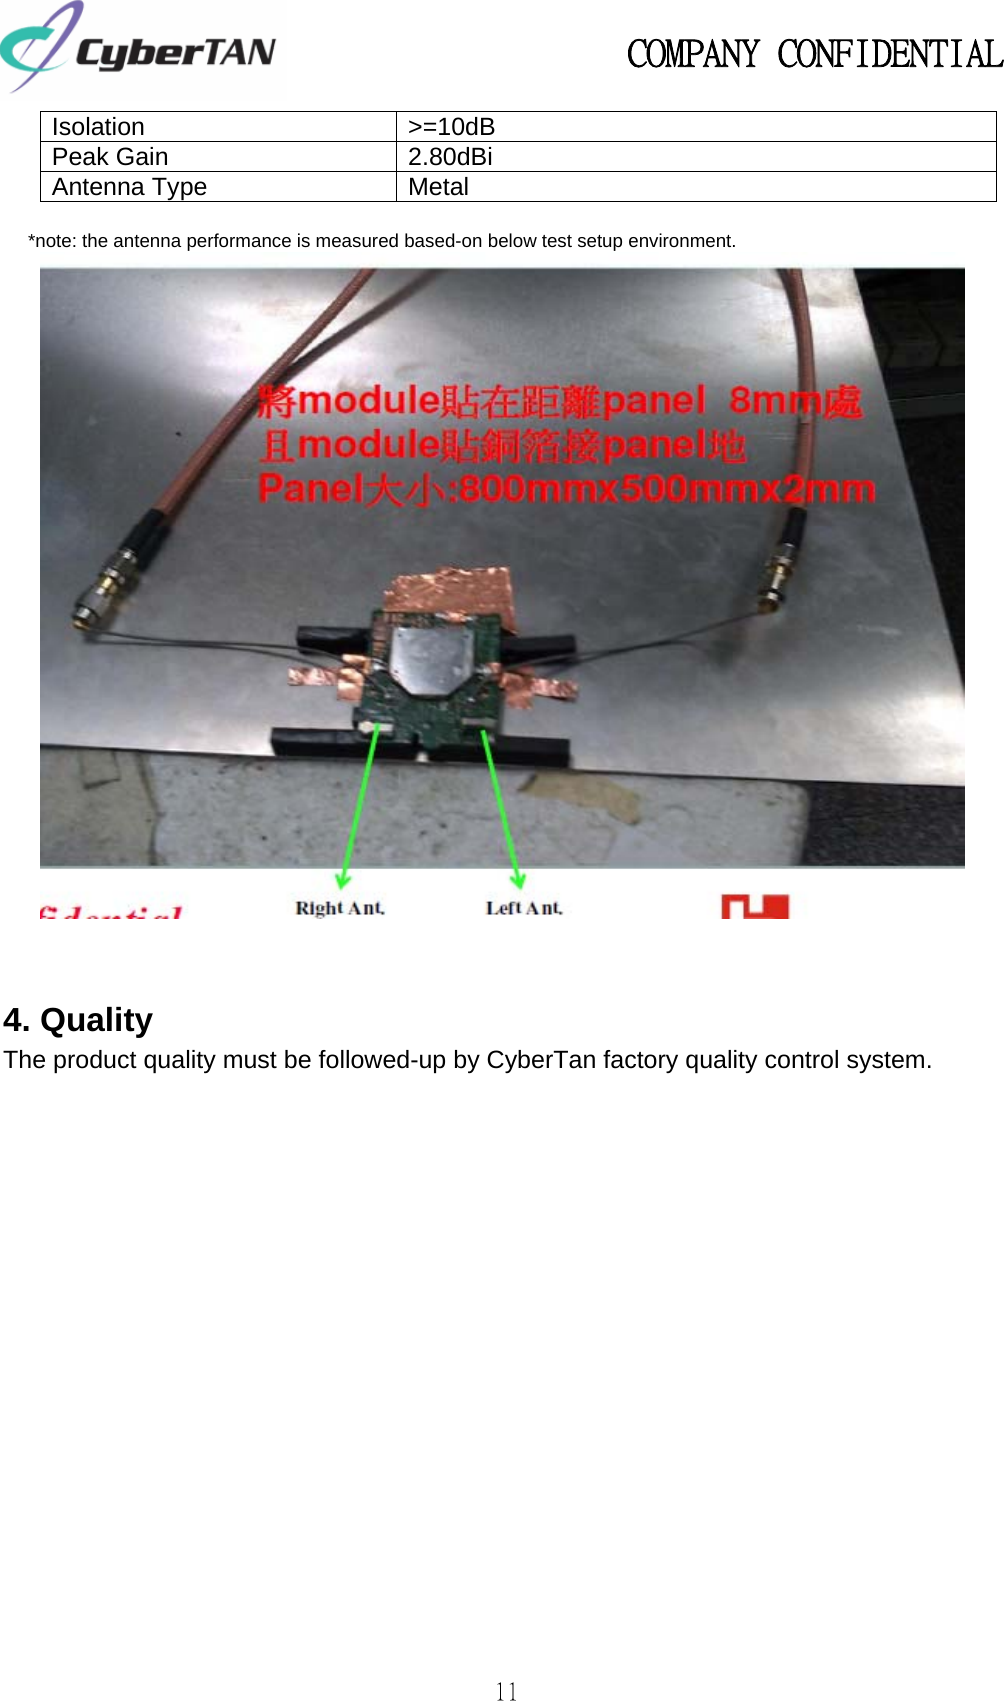                                                   COMPANY CONFIDENTIAL             11 Isolation &gt;=10dB Peak Gain  2.80dBi Antenna Type  Metal        *note: the antenna performance is measured based-on below test setup environment.    4. Quality The product quality must be followed-up by CyberTan factory quality control system.   